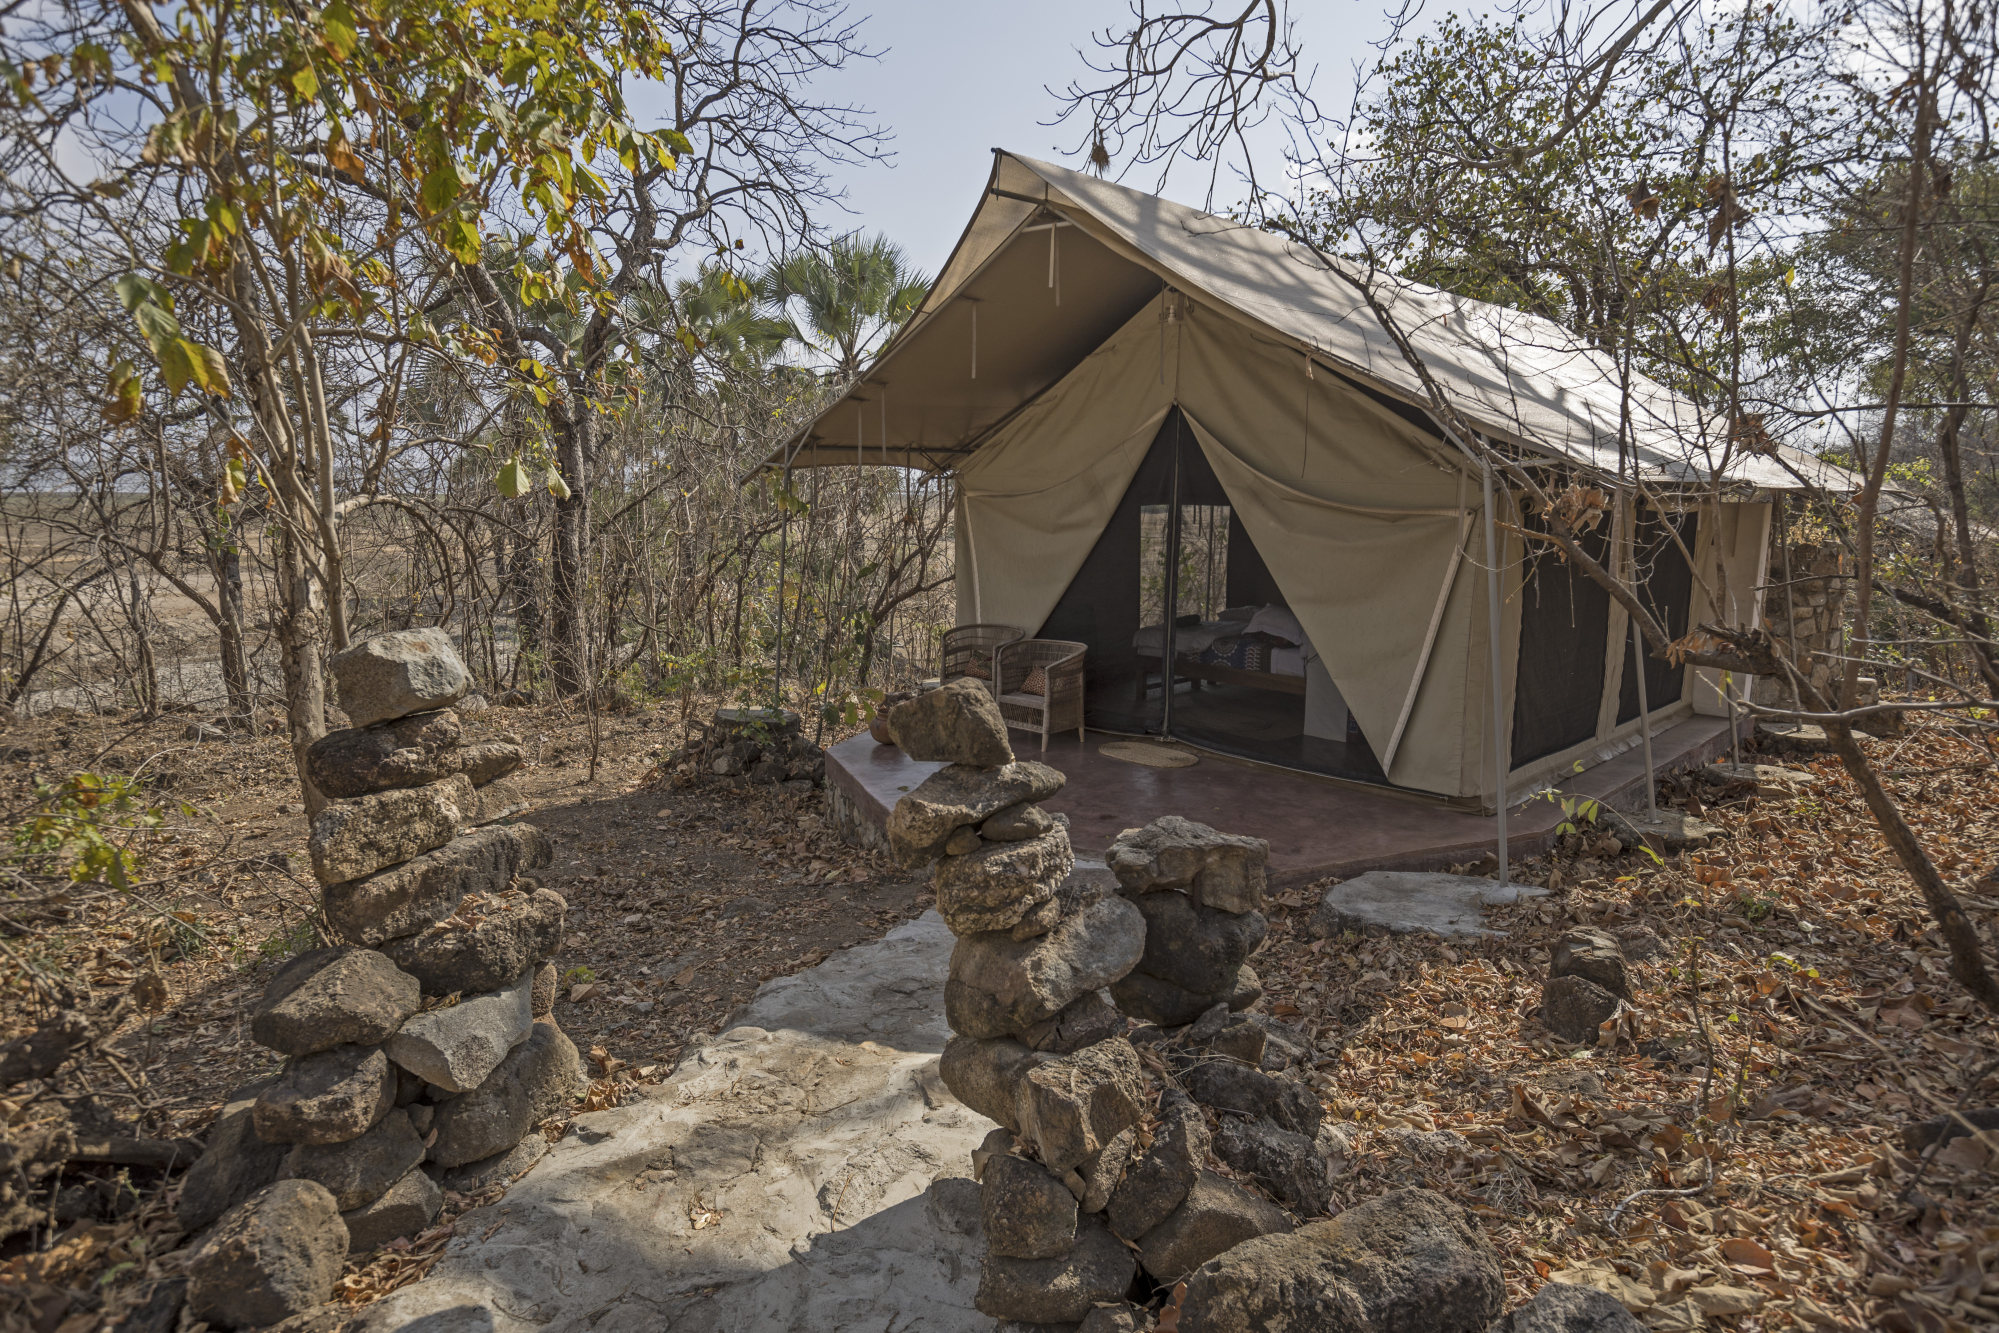 Visitors can stay overnight at Chimwala Bush Camp, and two more camps will be built in 2023. Photo: Daniel Allen